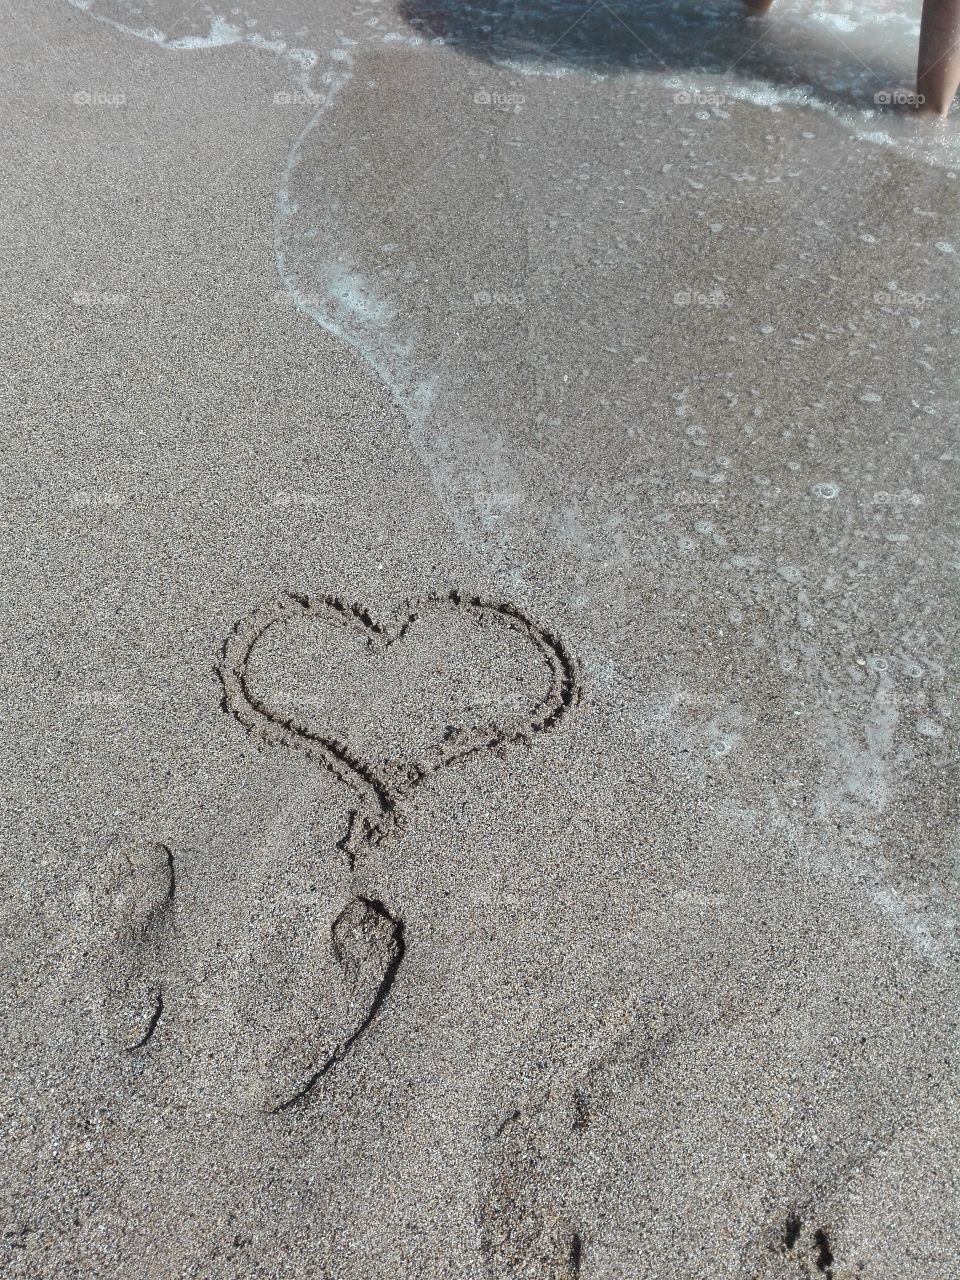 Sand, heart, footprints and waves